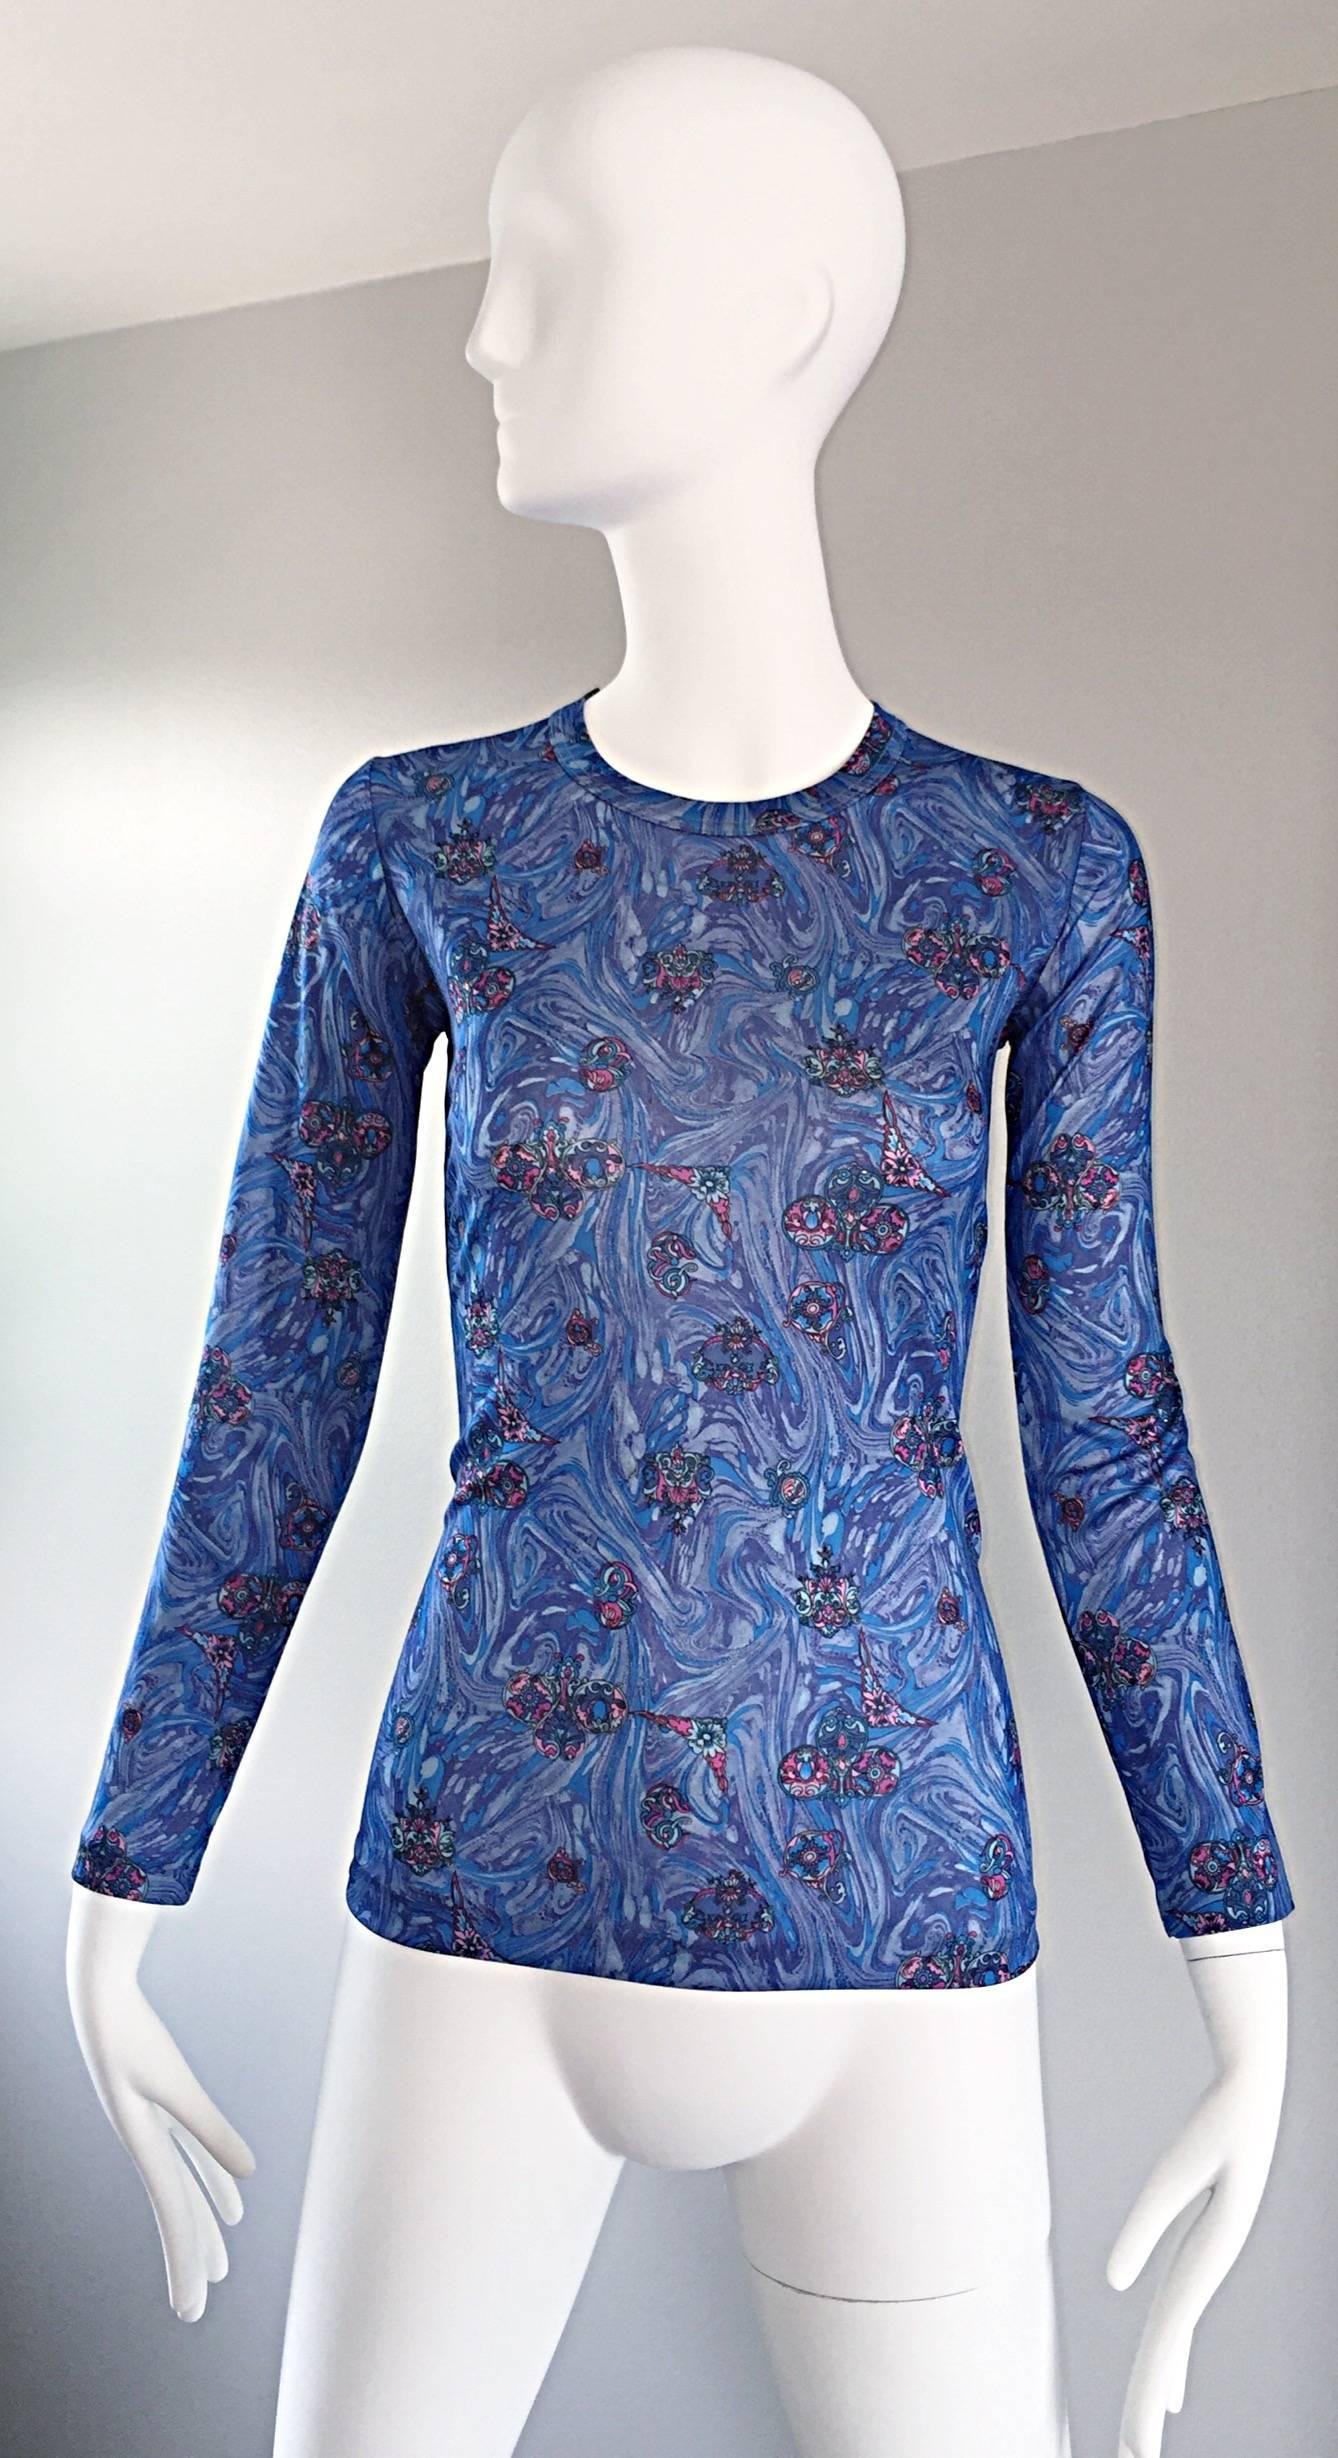 Brilliant 70s vintage GIVENCHY long sleeve fitted top! Beautiful blue color in various hues printed in a swirled watercolor print. Sporadic flowers and paisley in pinks, purple and teal throughout. Wonderful slim fit with a comfortable stretch